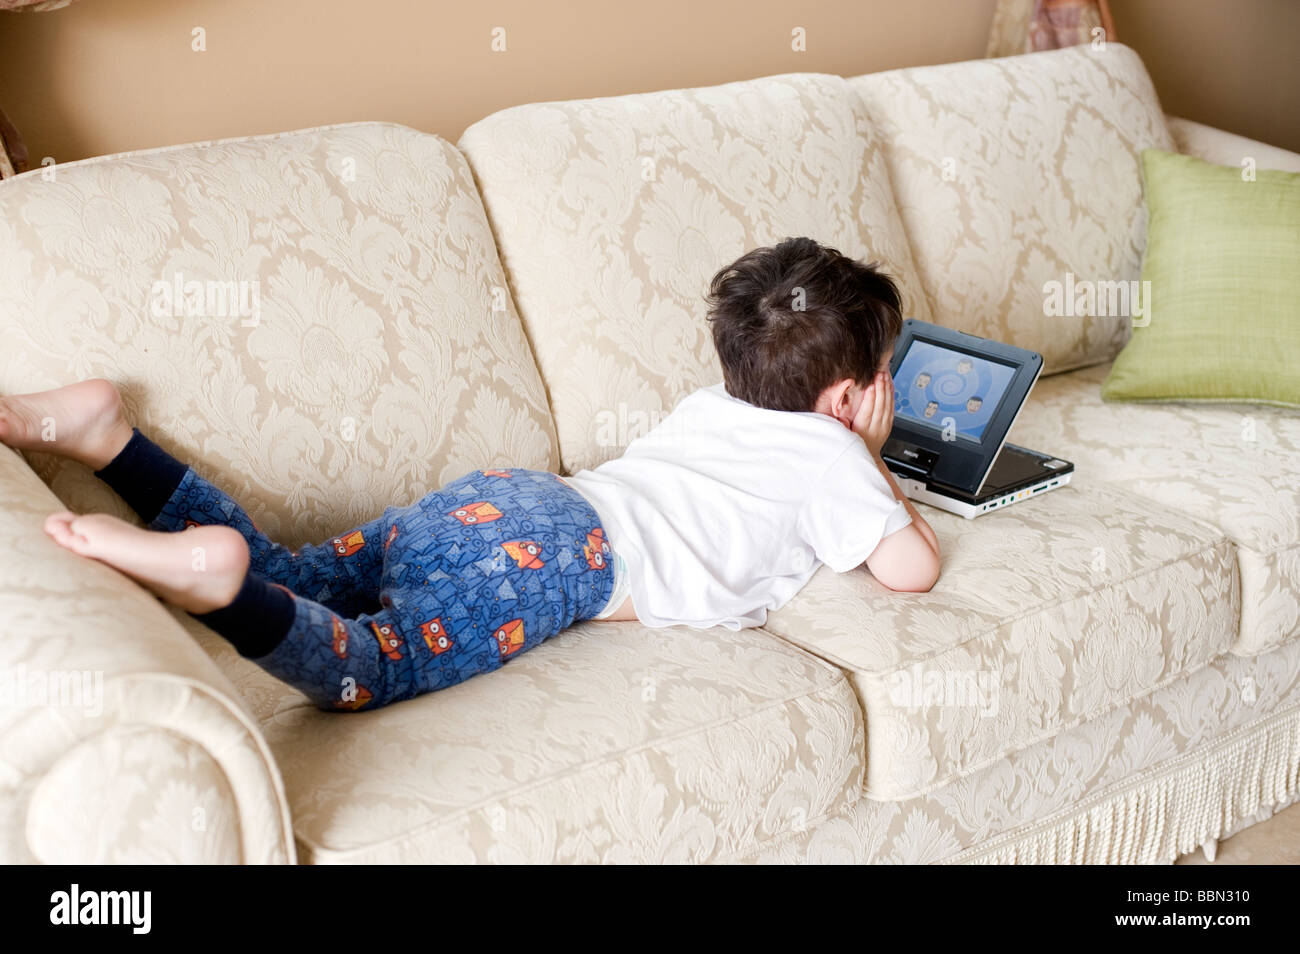 Three year old hispanic boy is mesmerized by a 'Wiggles' DVD playing on a portable DVD player Stock Photo